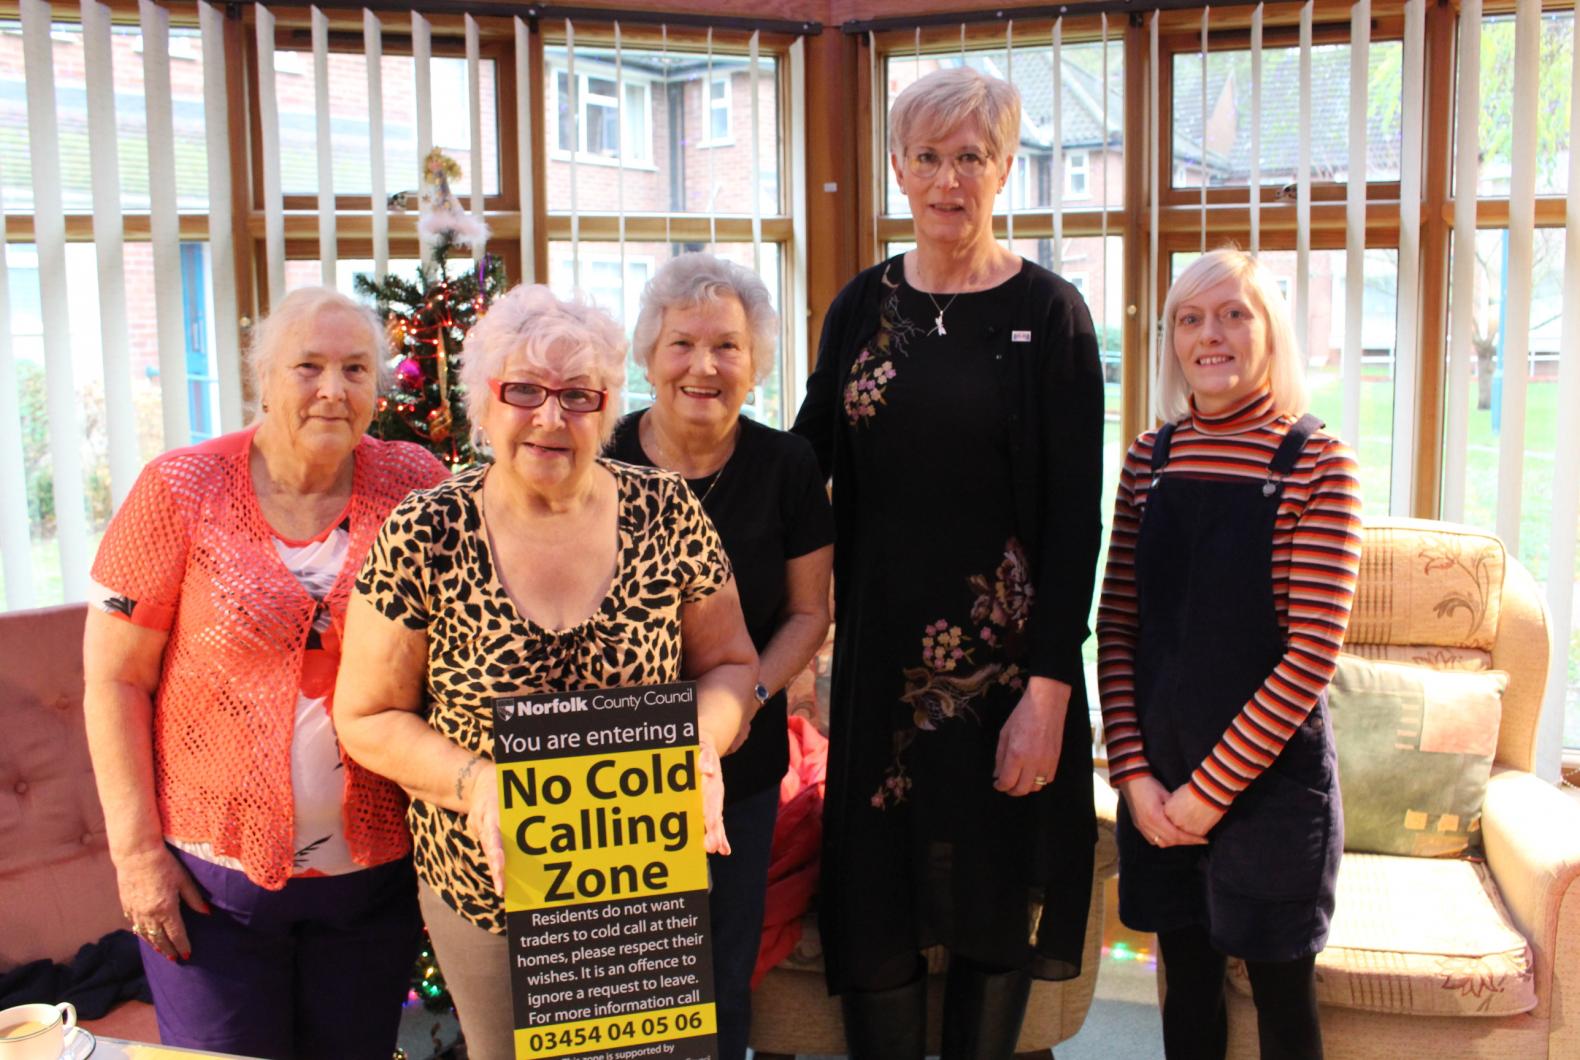 Lanchester Court residents joined by Norwich Housing Society staff